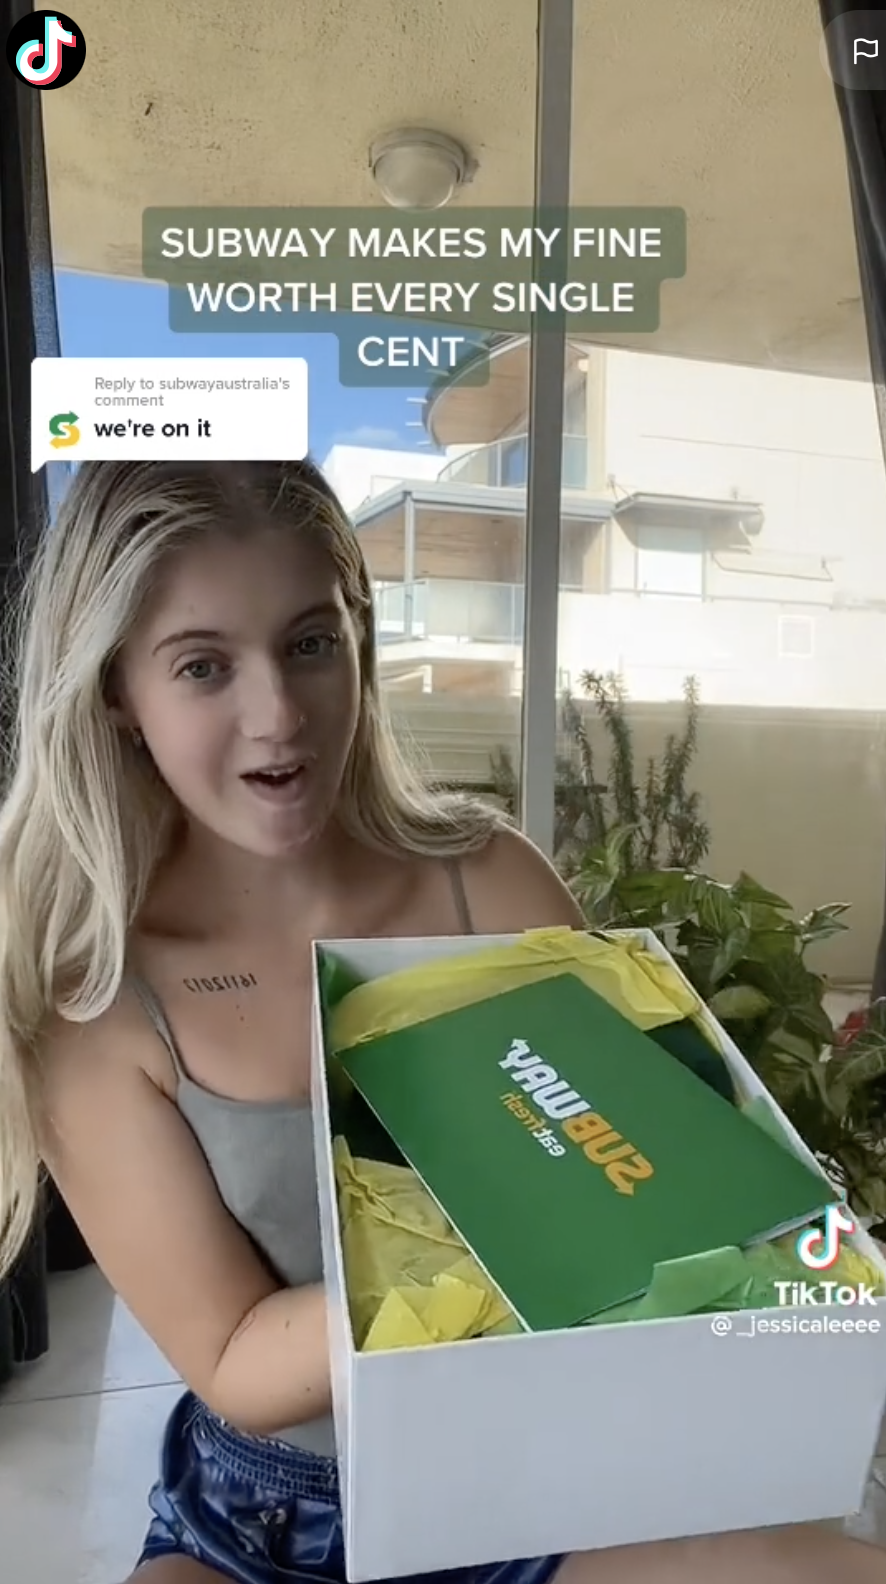 Rm8,069 for a 6-inches subway from singapore as australian woman landed home without declaring it